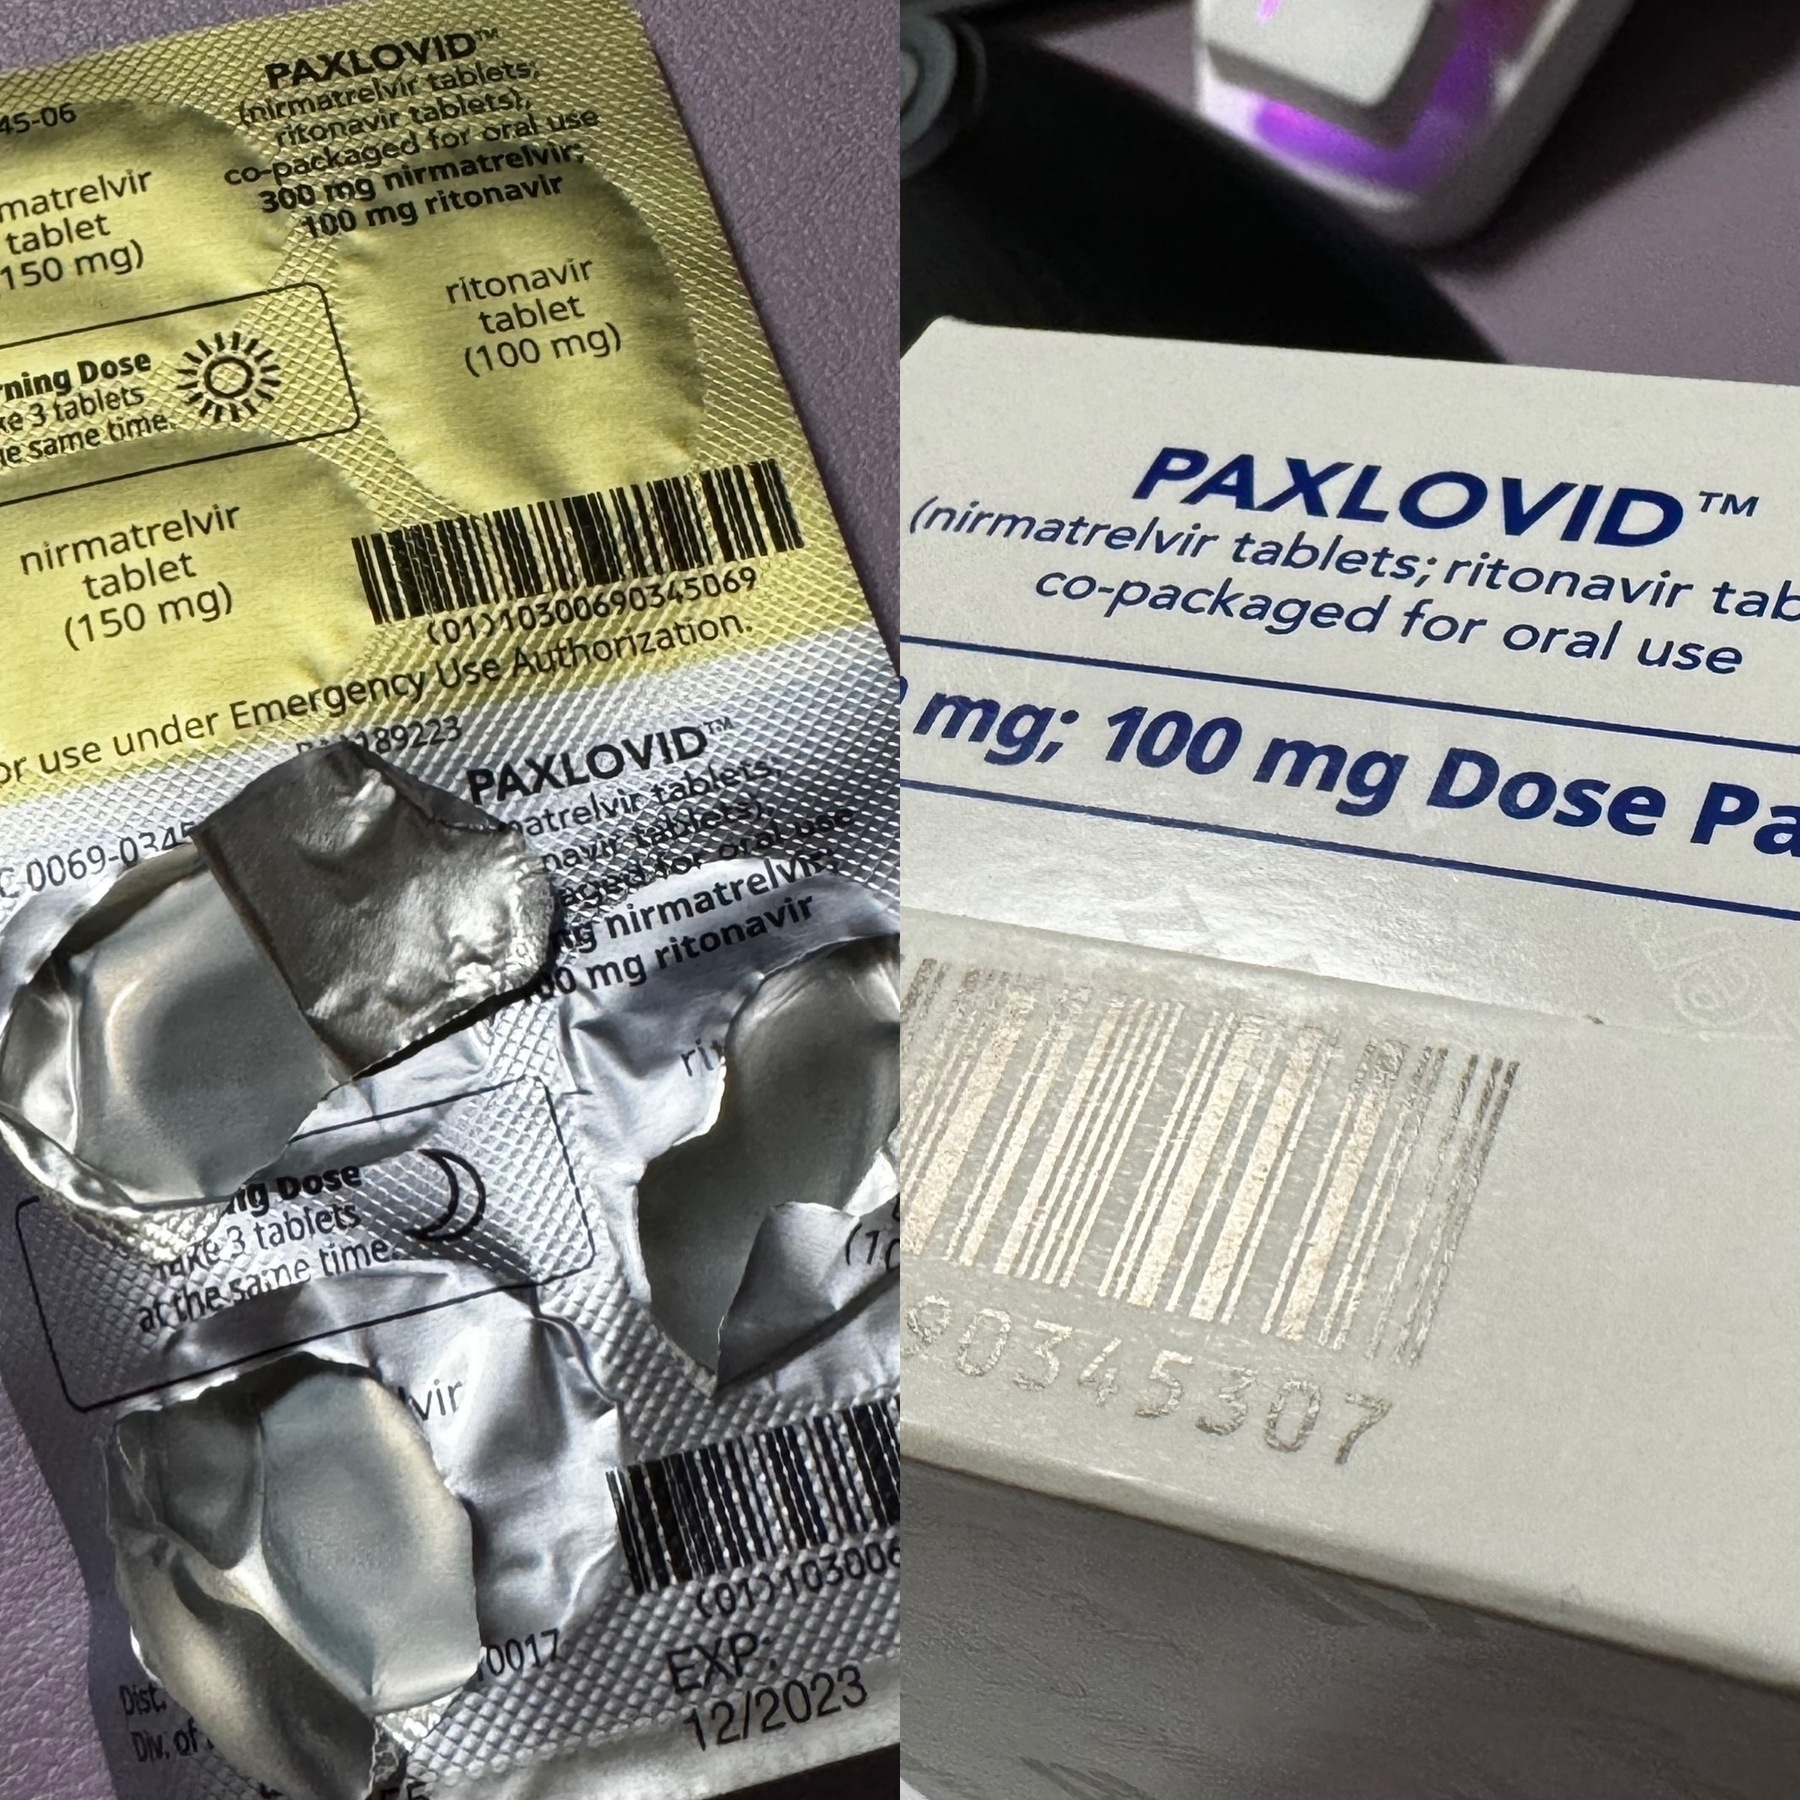 Packaging and a blister pack of Paxlovid medication with some tablets removed, indicating it is for emergency use under authorization.